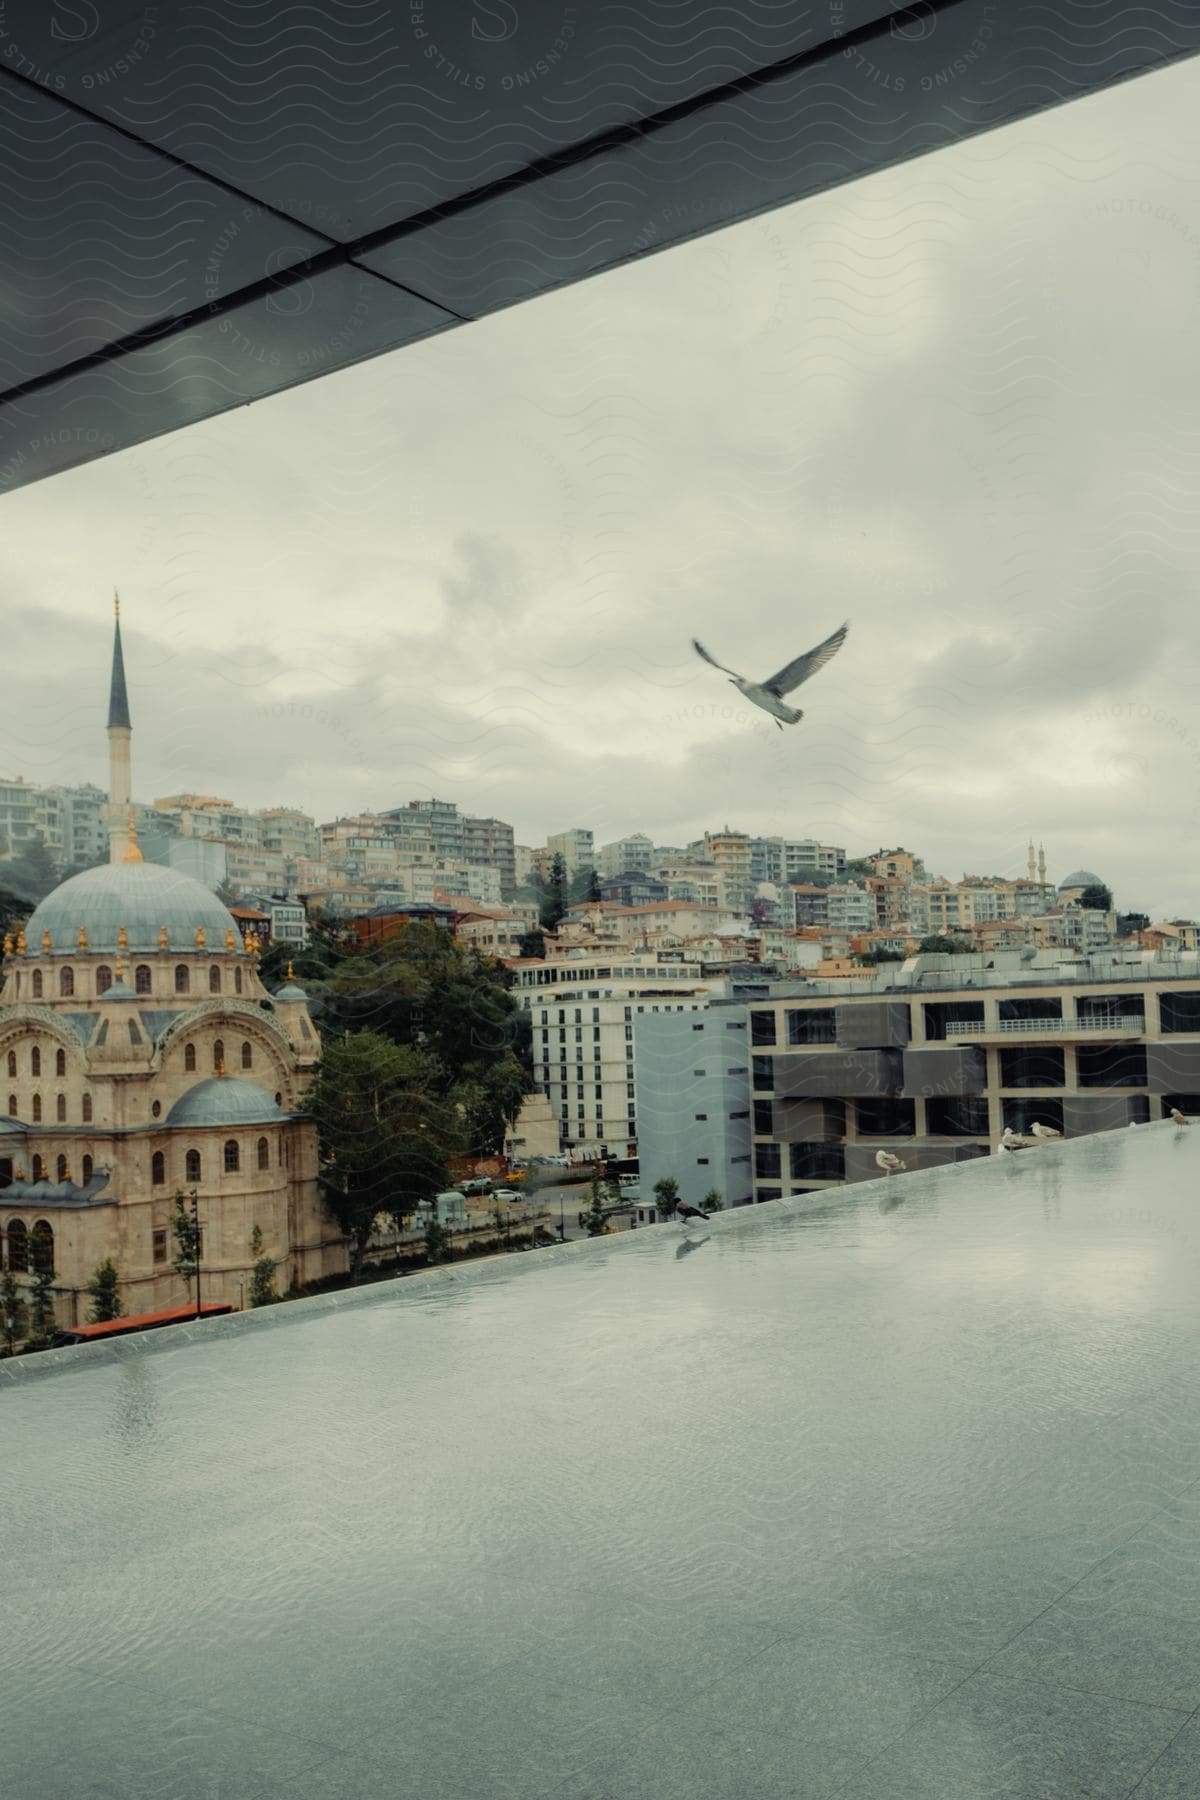 Aerial of a city with mosque, buildings, a flying bird and cloudy sky.